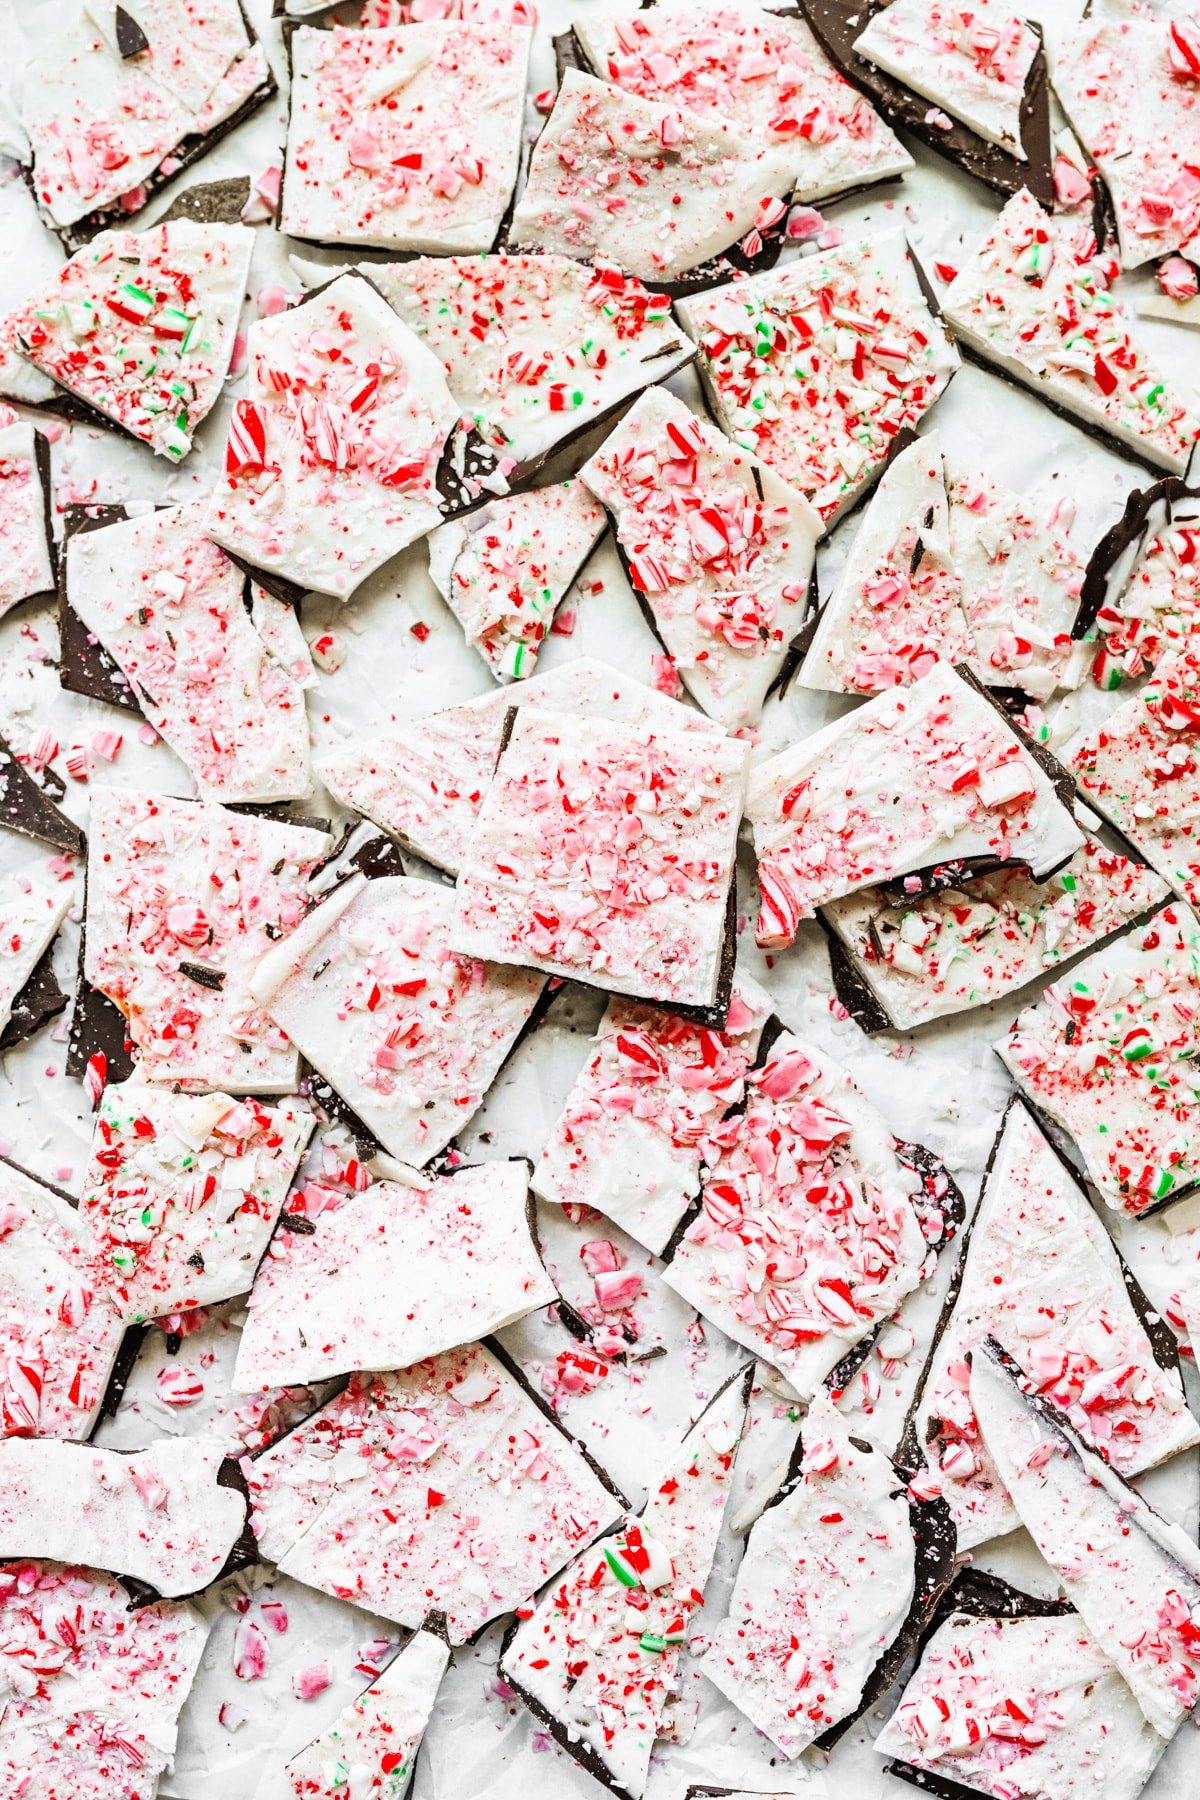 Peppermint bark spread out on a white background.